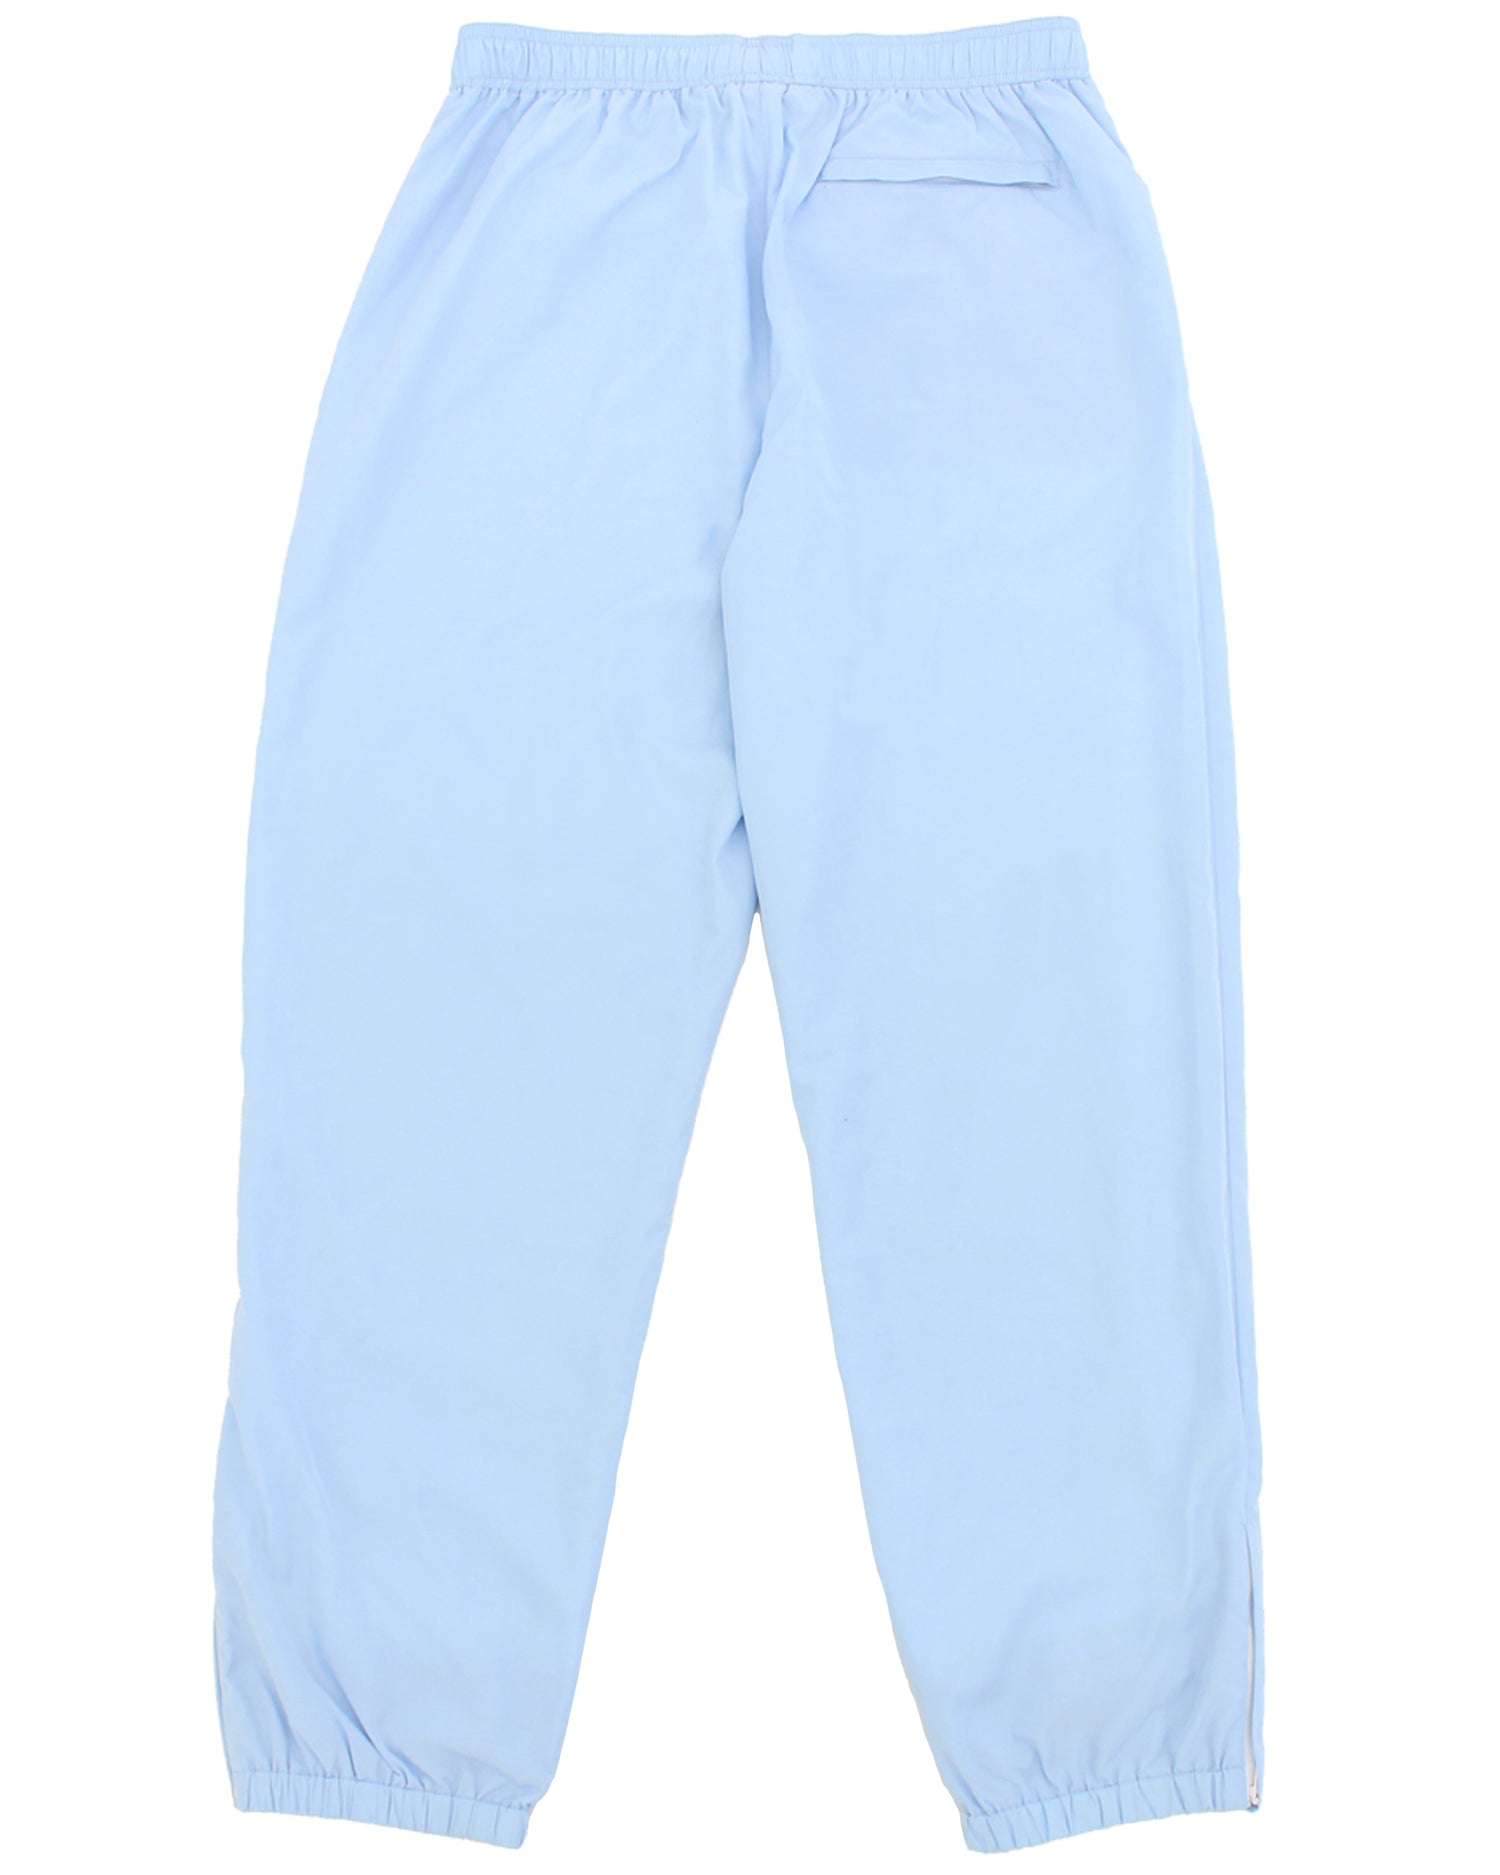 SCRIMMAGE TRACKPANT - BABY BLUE